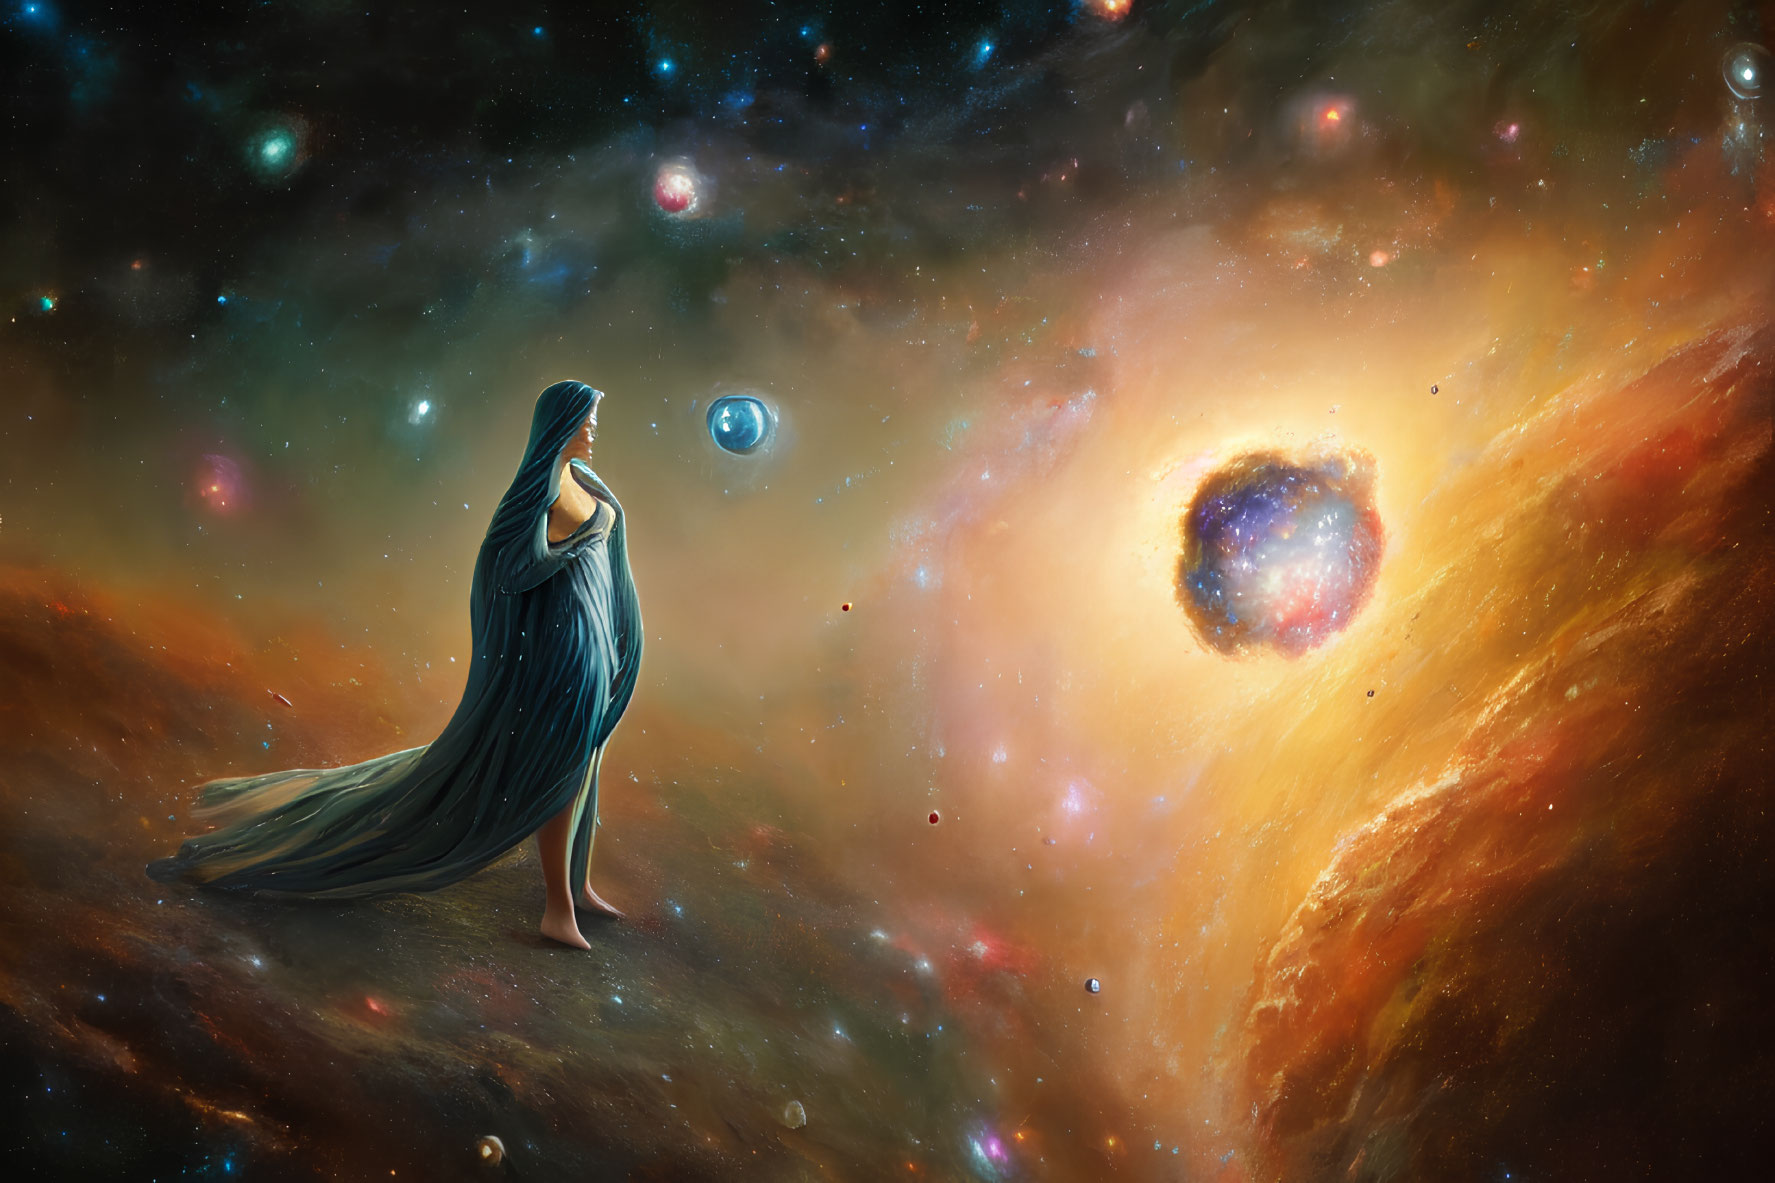 Woman in Flowing Dress Contemplating Galaxy Under Cosmic Lights